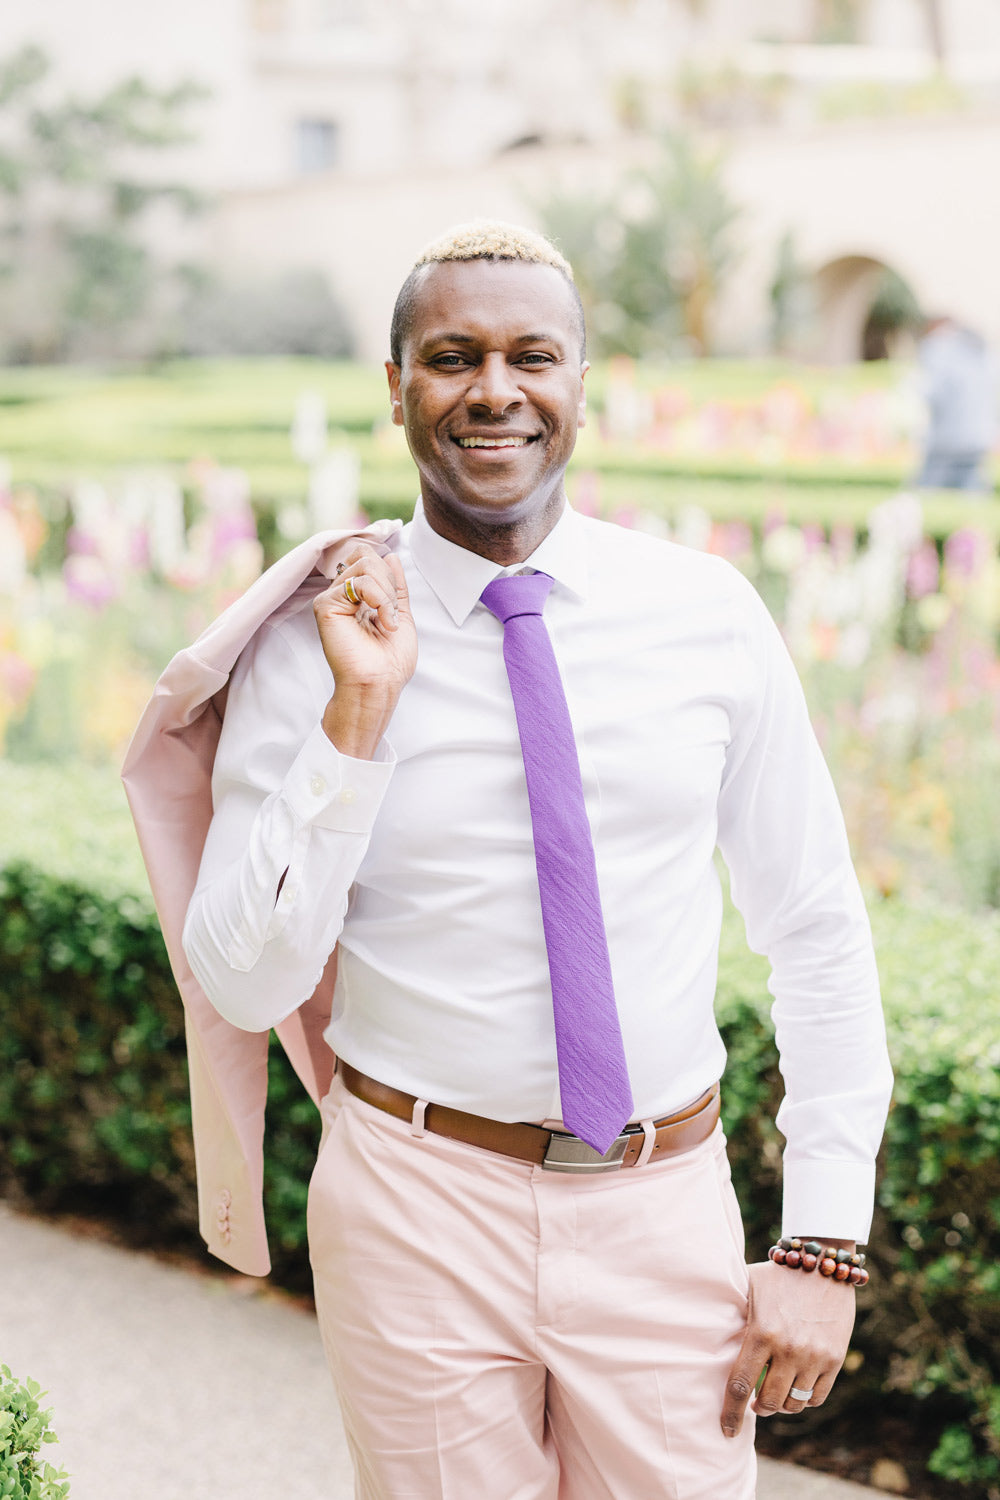 Grape tie worn with a white shirt and light pink suit.